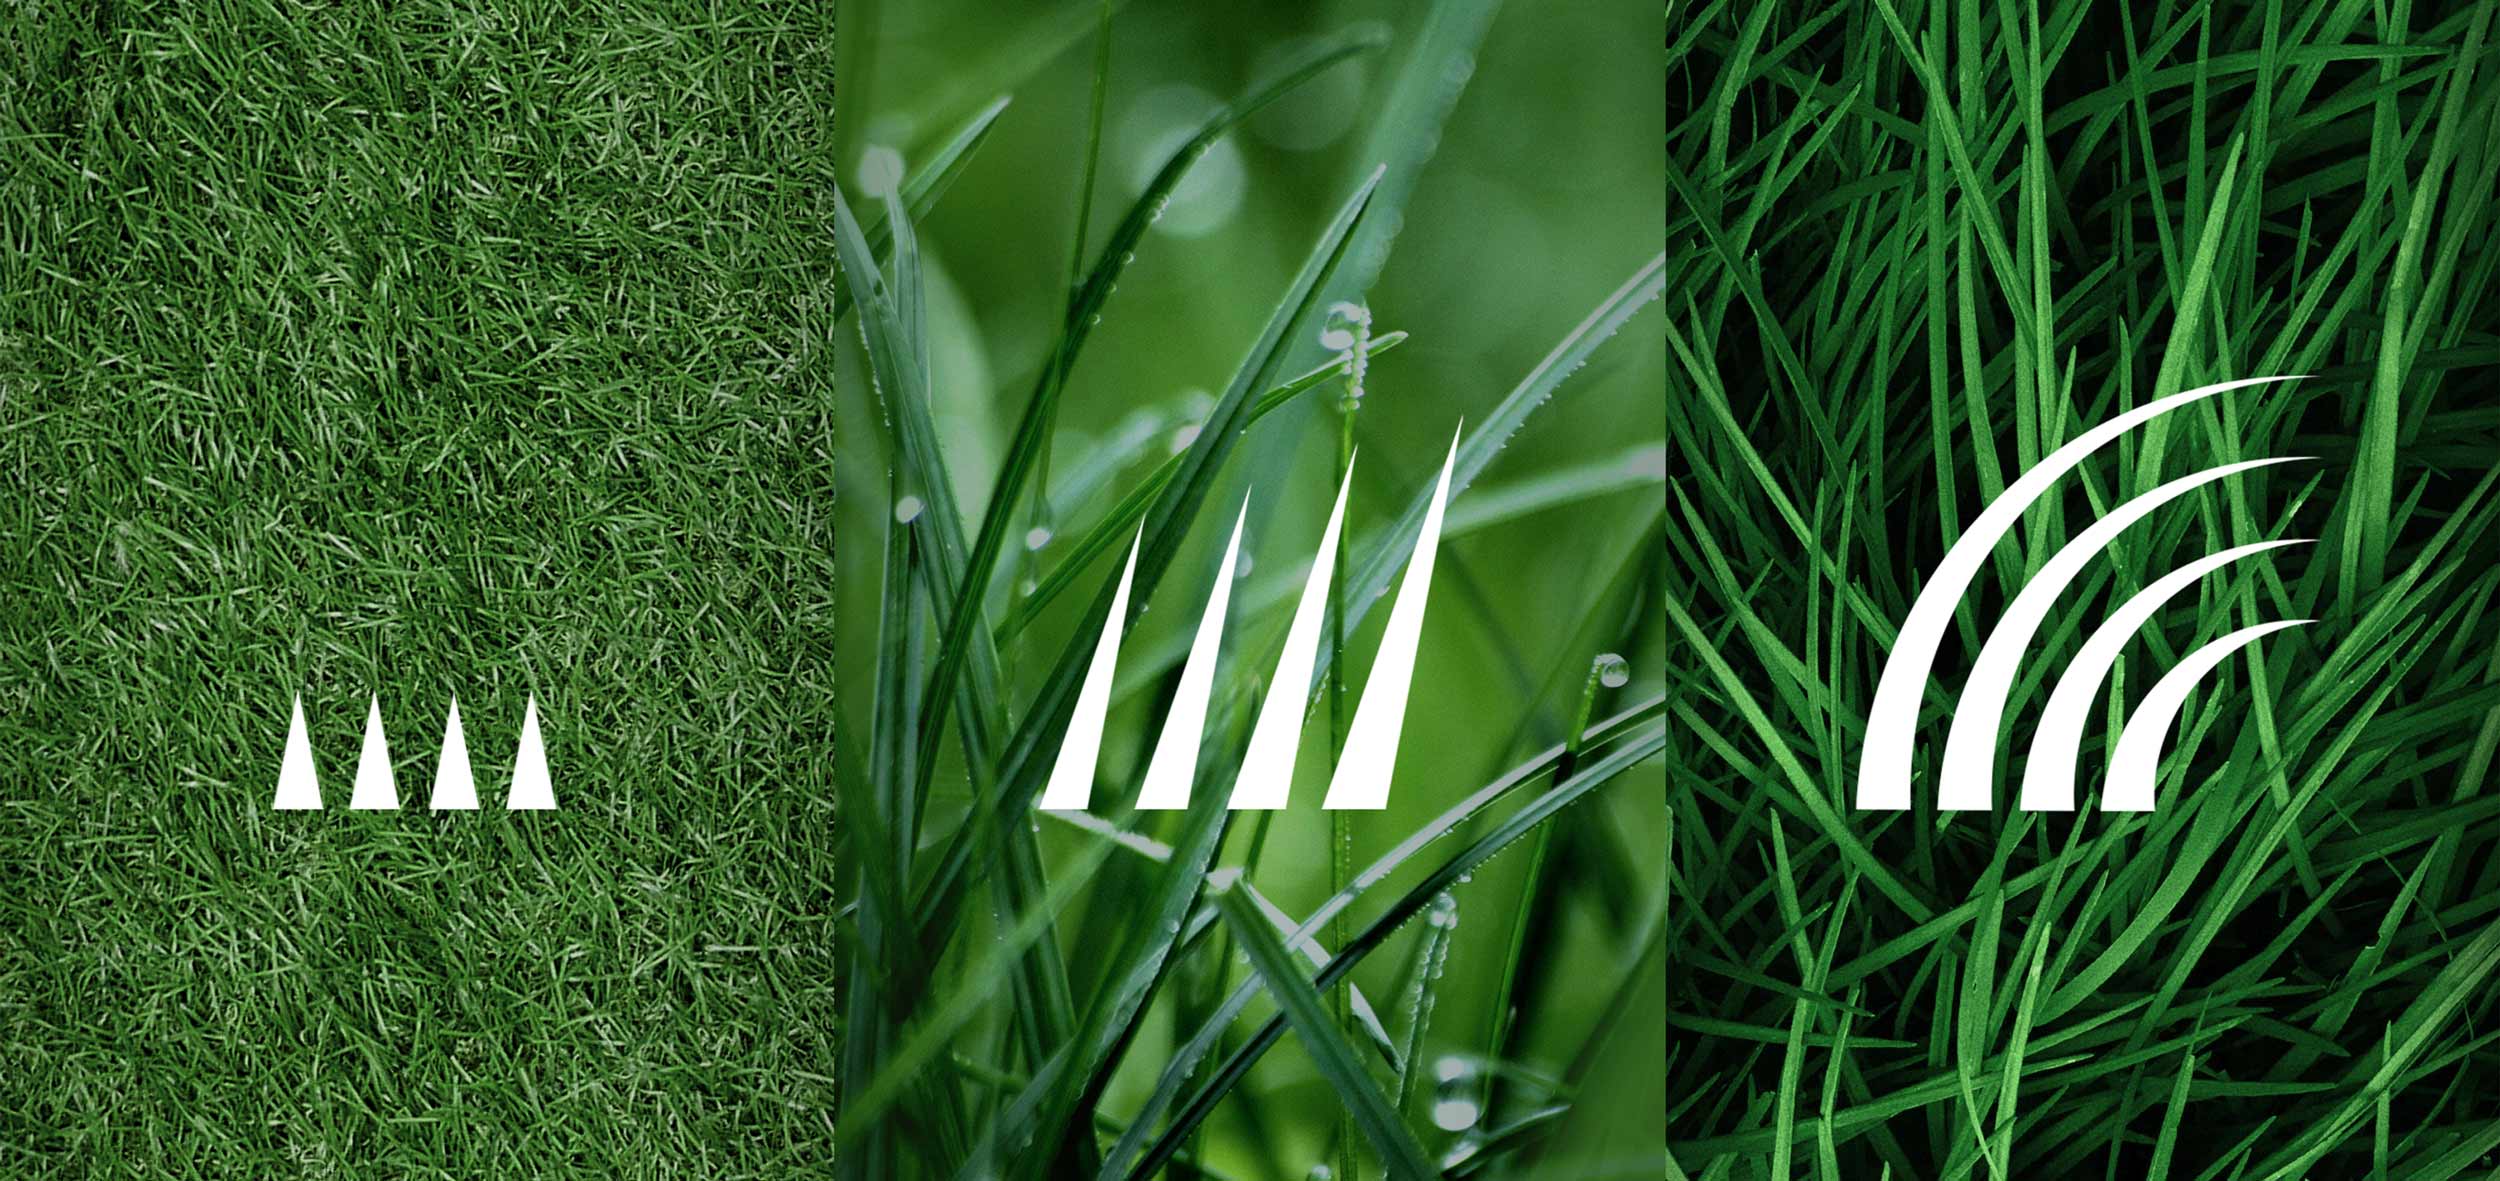 grass length iconography